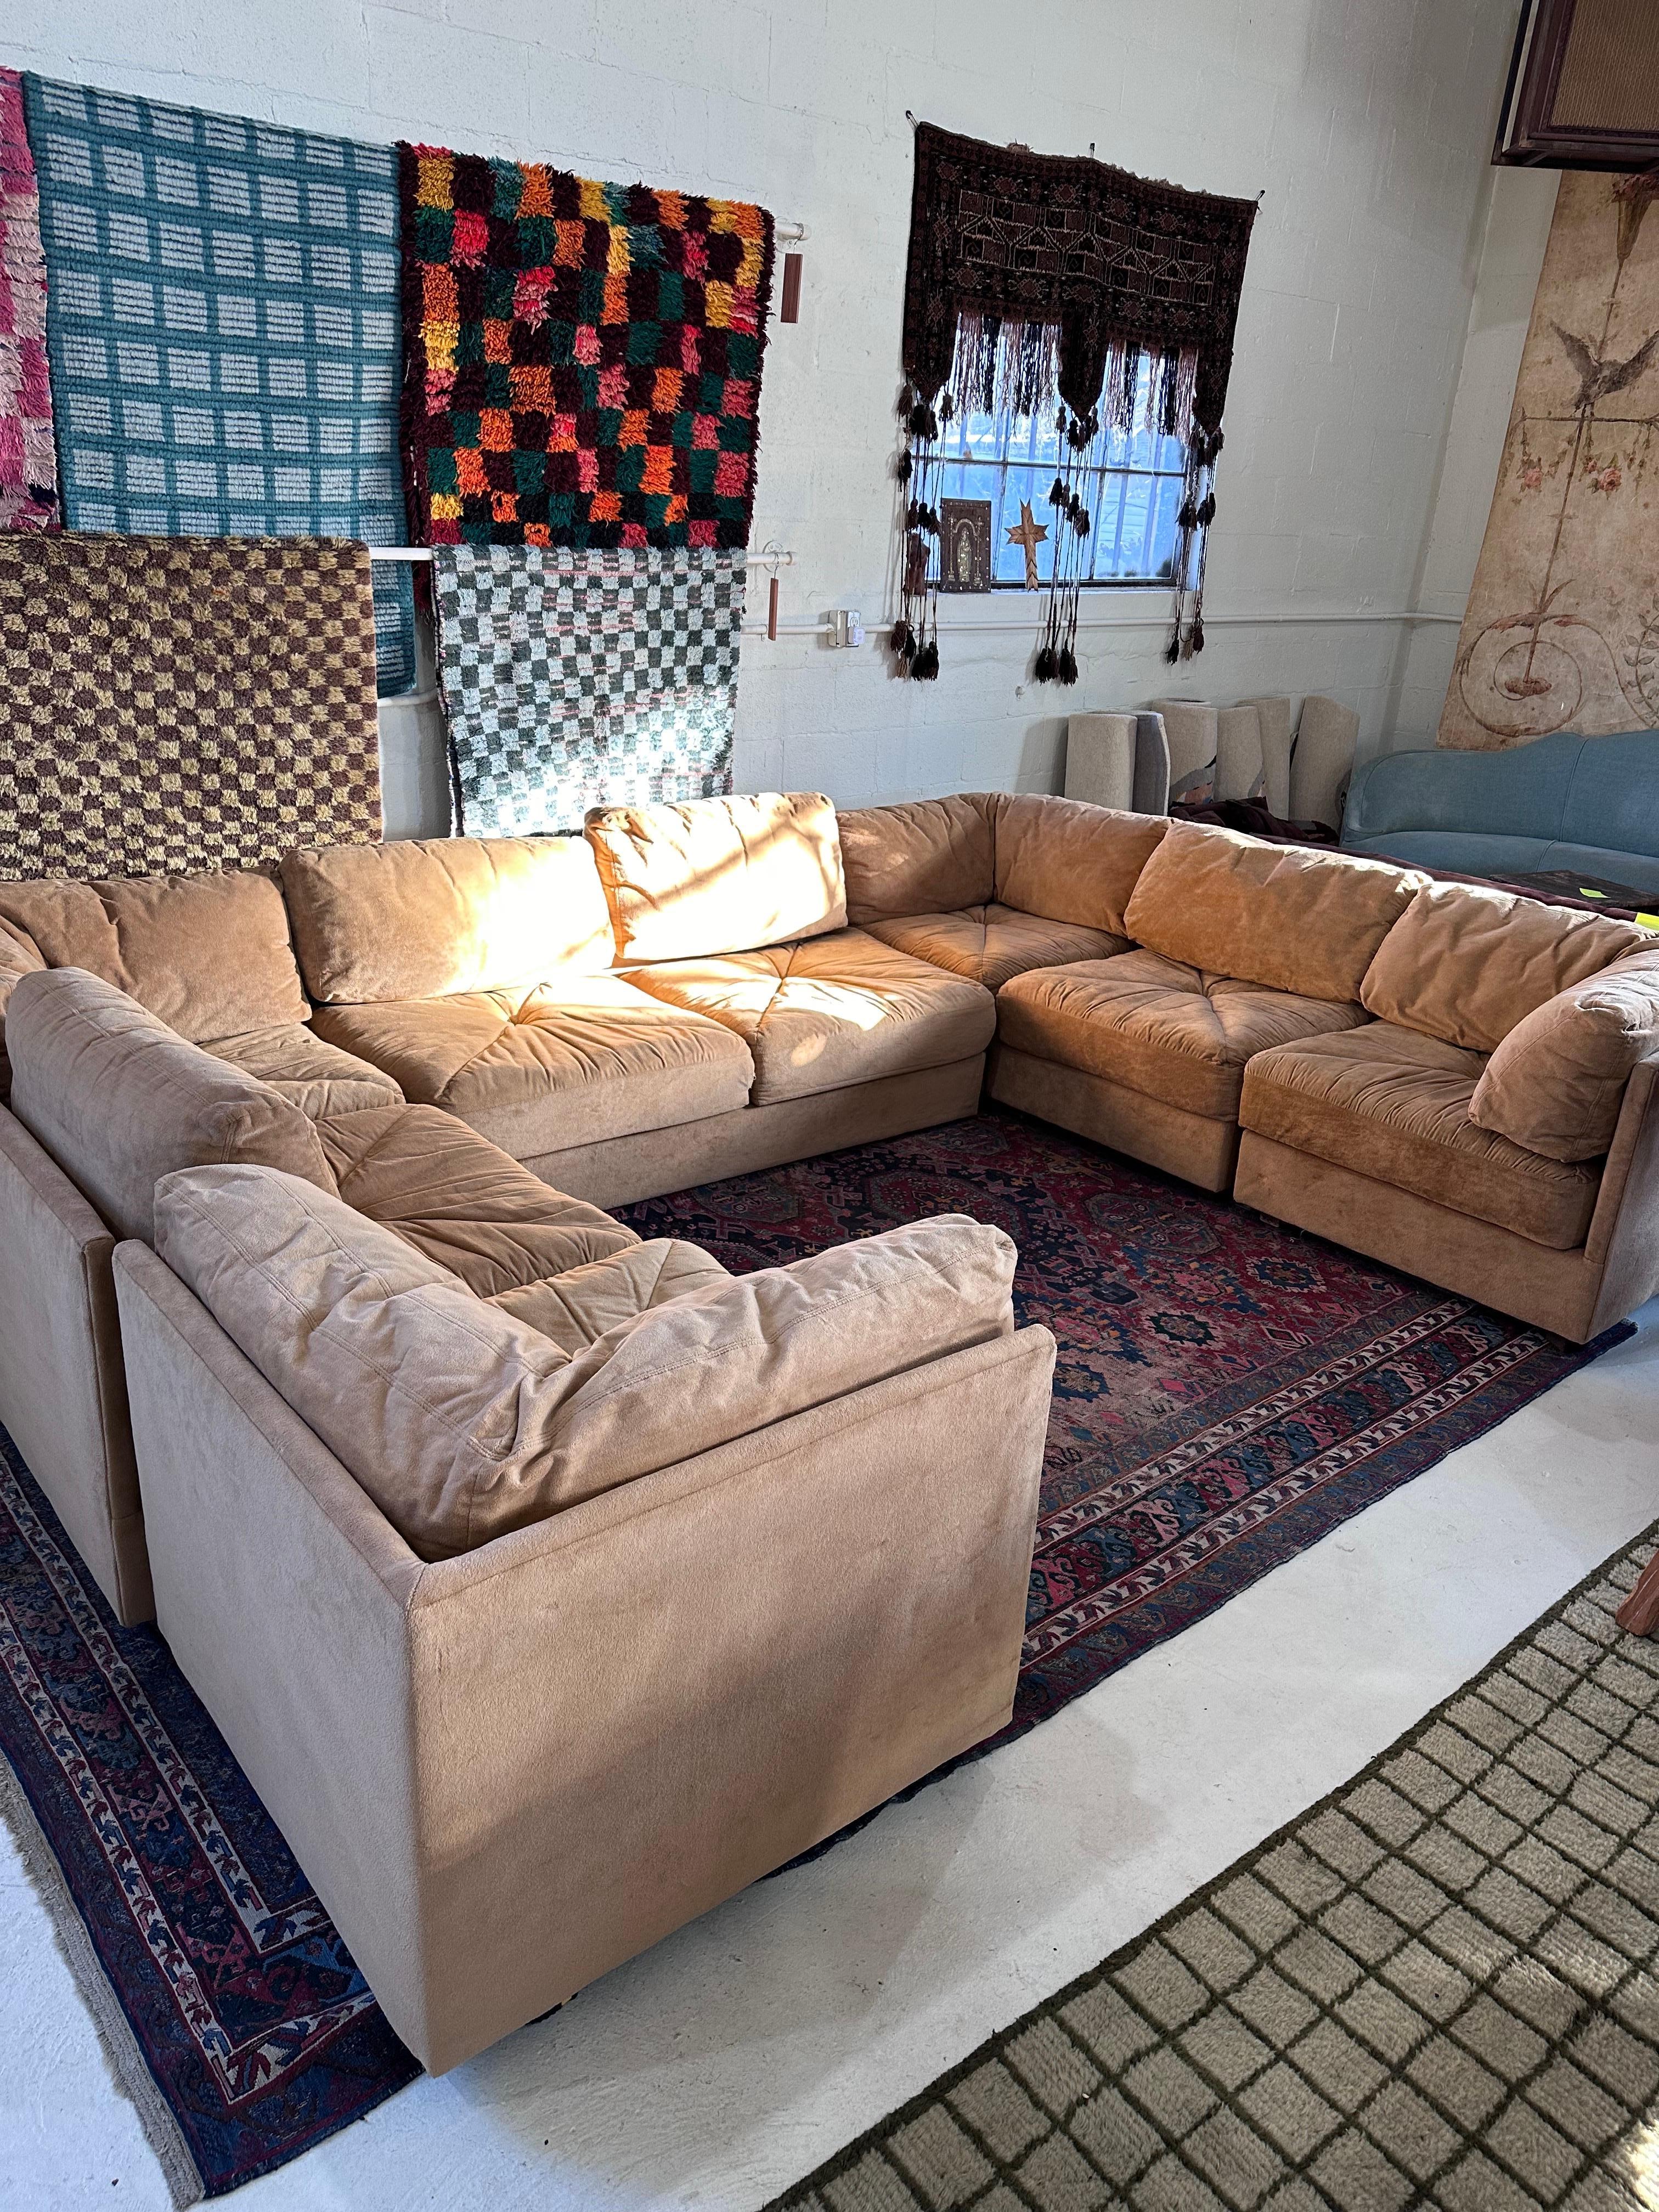 7-piece Milo Baughman style cube modular sofa with pullout full-sized bed. Original velvet-like upholstery is in perfect condition with only minor, if any signs of age. All foam is intact and is firm with no signs of crunchiness. During the